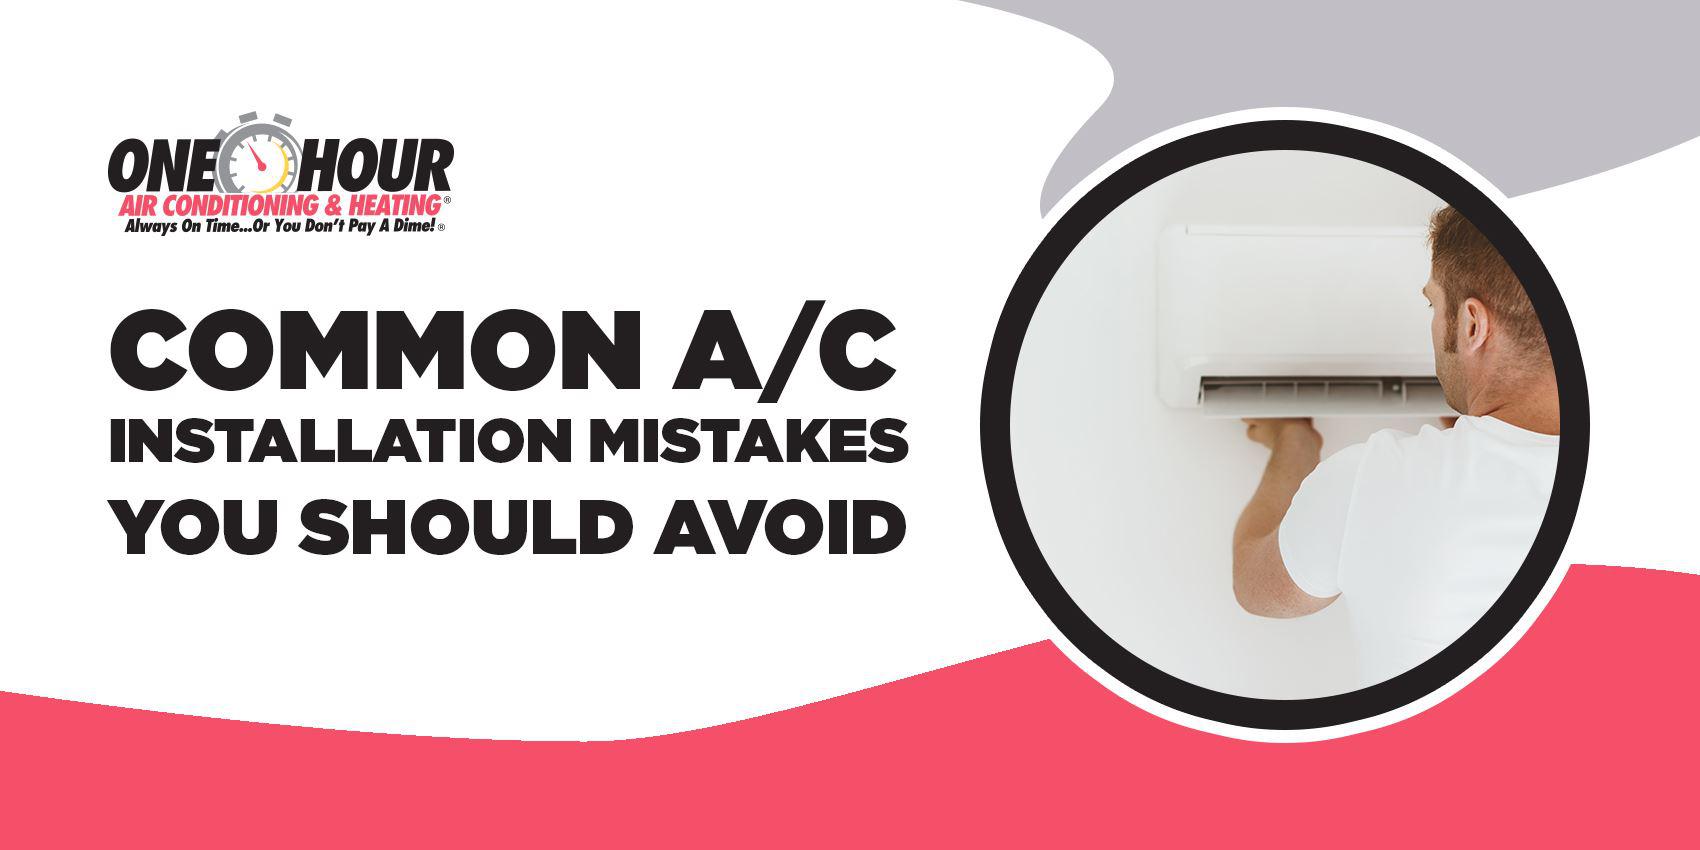 Common A/C Installation Mistakes You Should Avoid